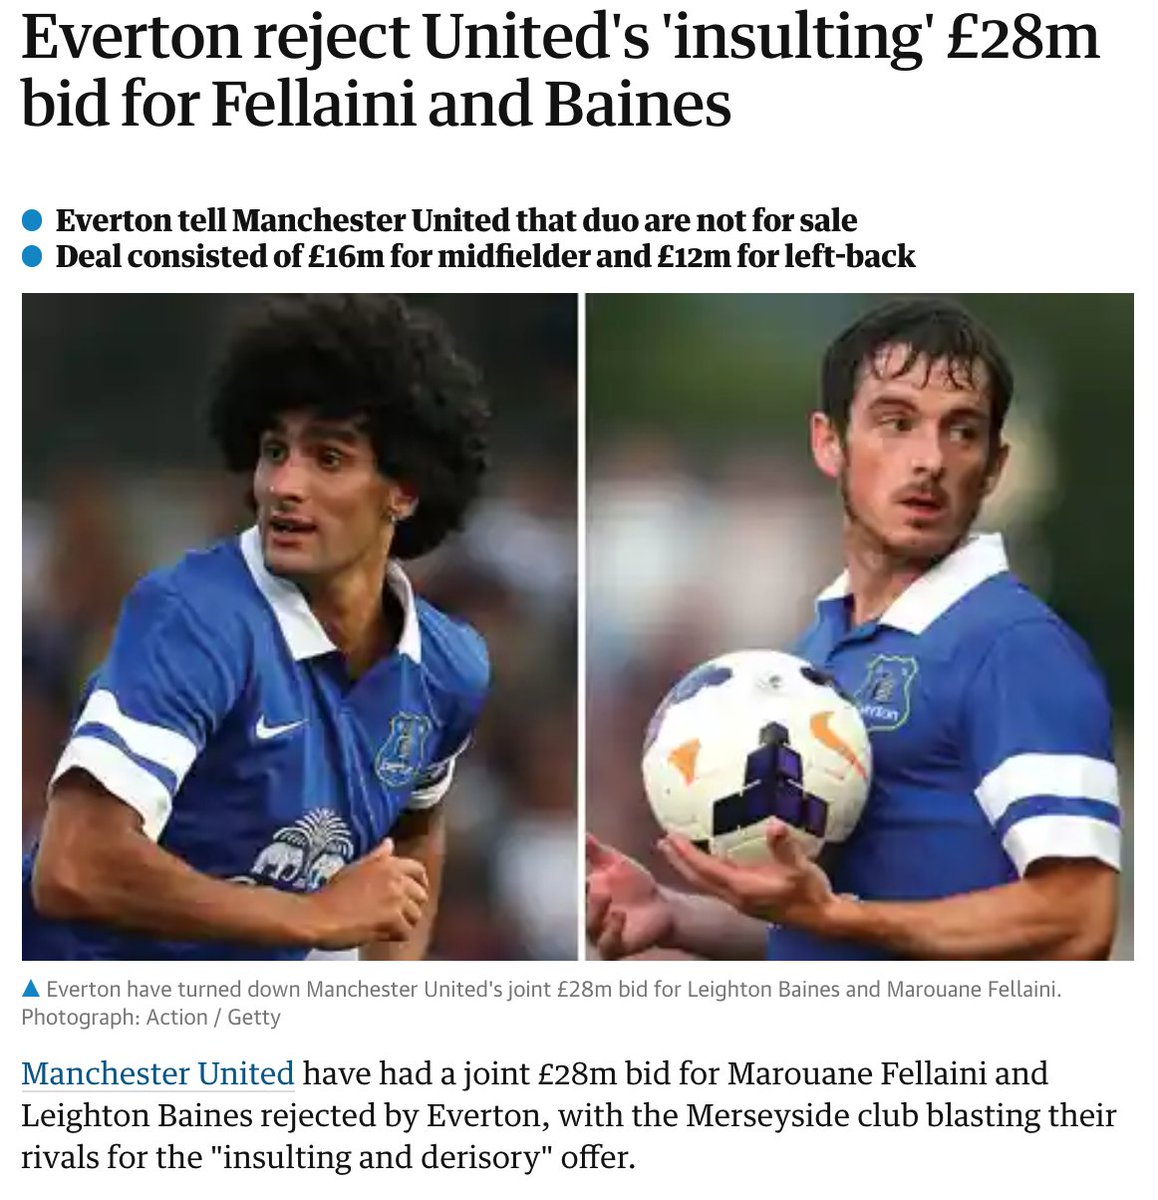 Three weeks after Fellaini’s release clause of £23.5m had expired, United offered £16m for Fellaini and £12m for Baines. Everton rejected what they called a "derisory and insulting" bid.